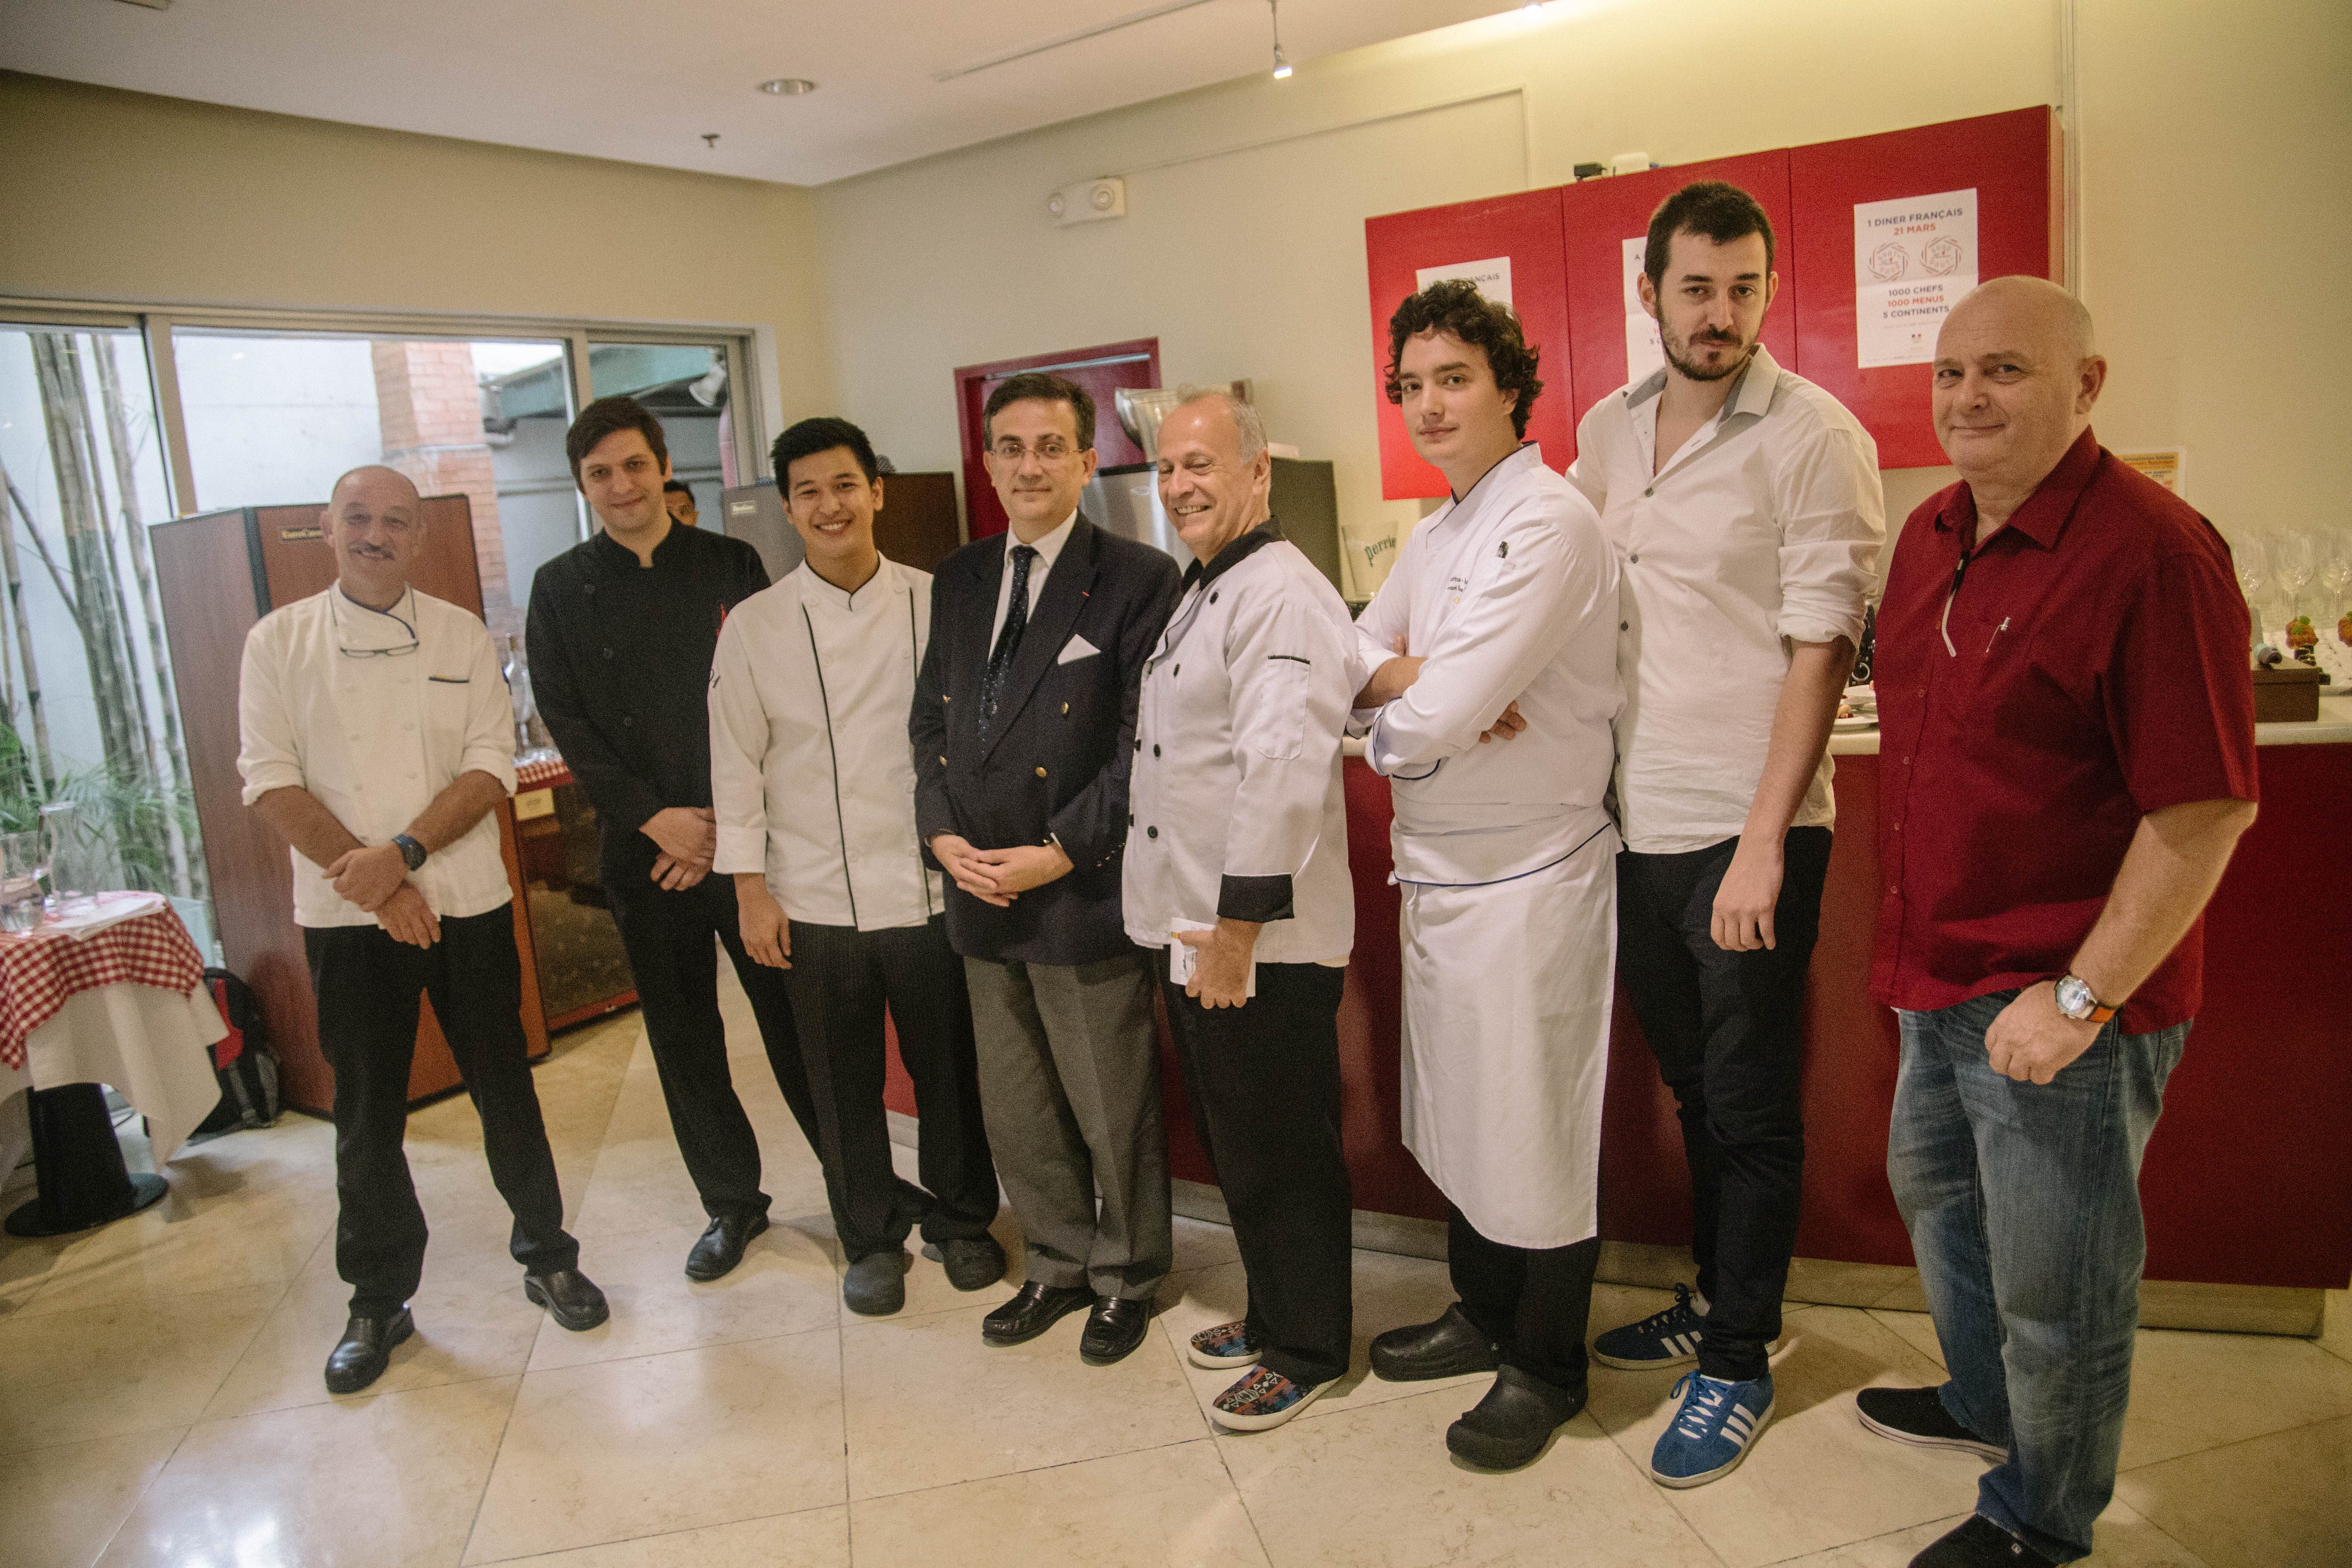 Left to right: Chef Marc Aubry of Champetre Boutique & Restaurant, Chef Julian Koeberl of L'Aubergine, Chef Justin Baradas of Restaurant 101, French Ambassador Thierry Mathou, Chef Michel Herbert of Le Bistro d'Agathe, Chef Paul Cottanceau-Pocard of Spiral, Chef Adrien Guerrey of La Maison Rose, and Chef Pierre Cornelis of Vatel Restaurant   